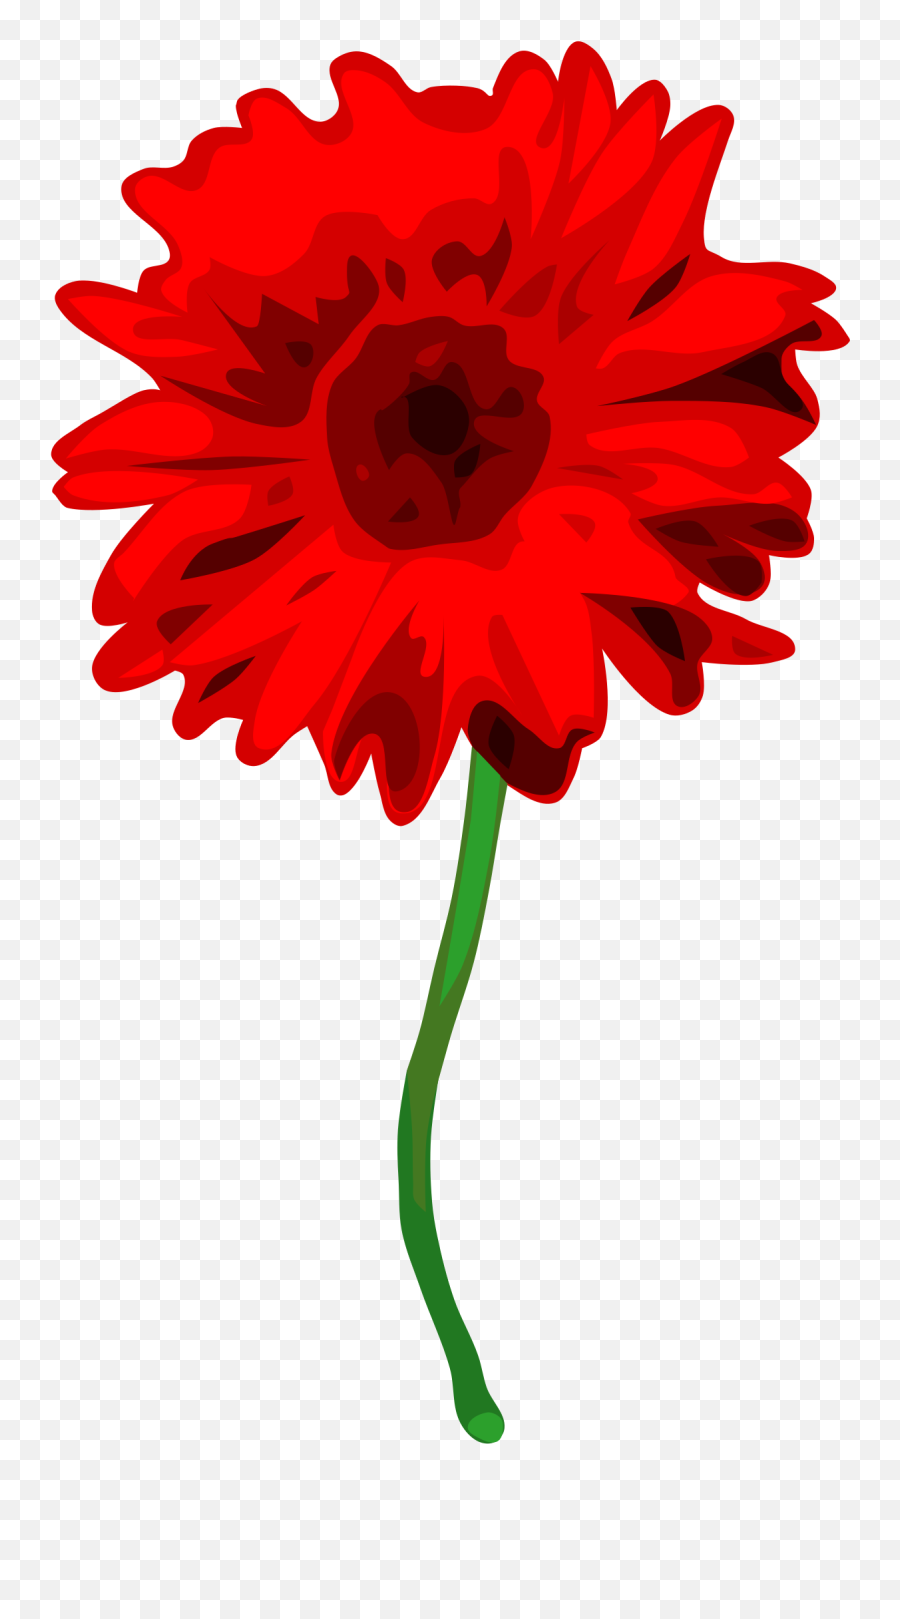 Gerbera Daisy Transparent File Png Images - Small Flower Transparent Background,Daisy Transparent Background